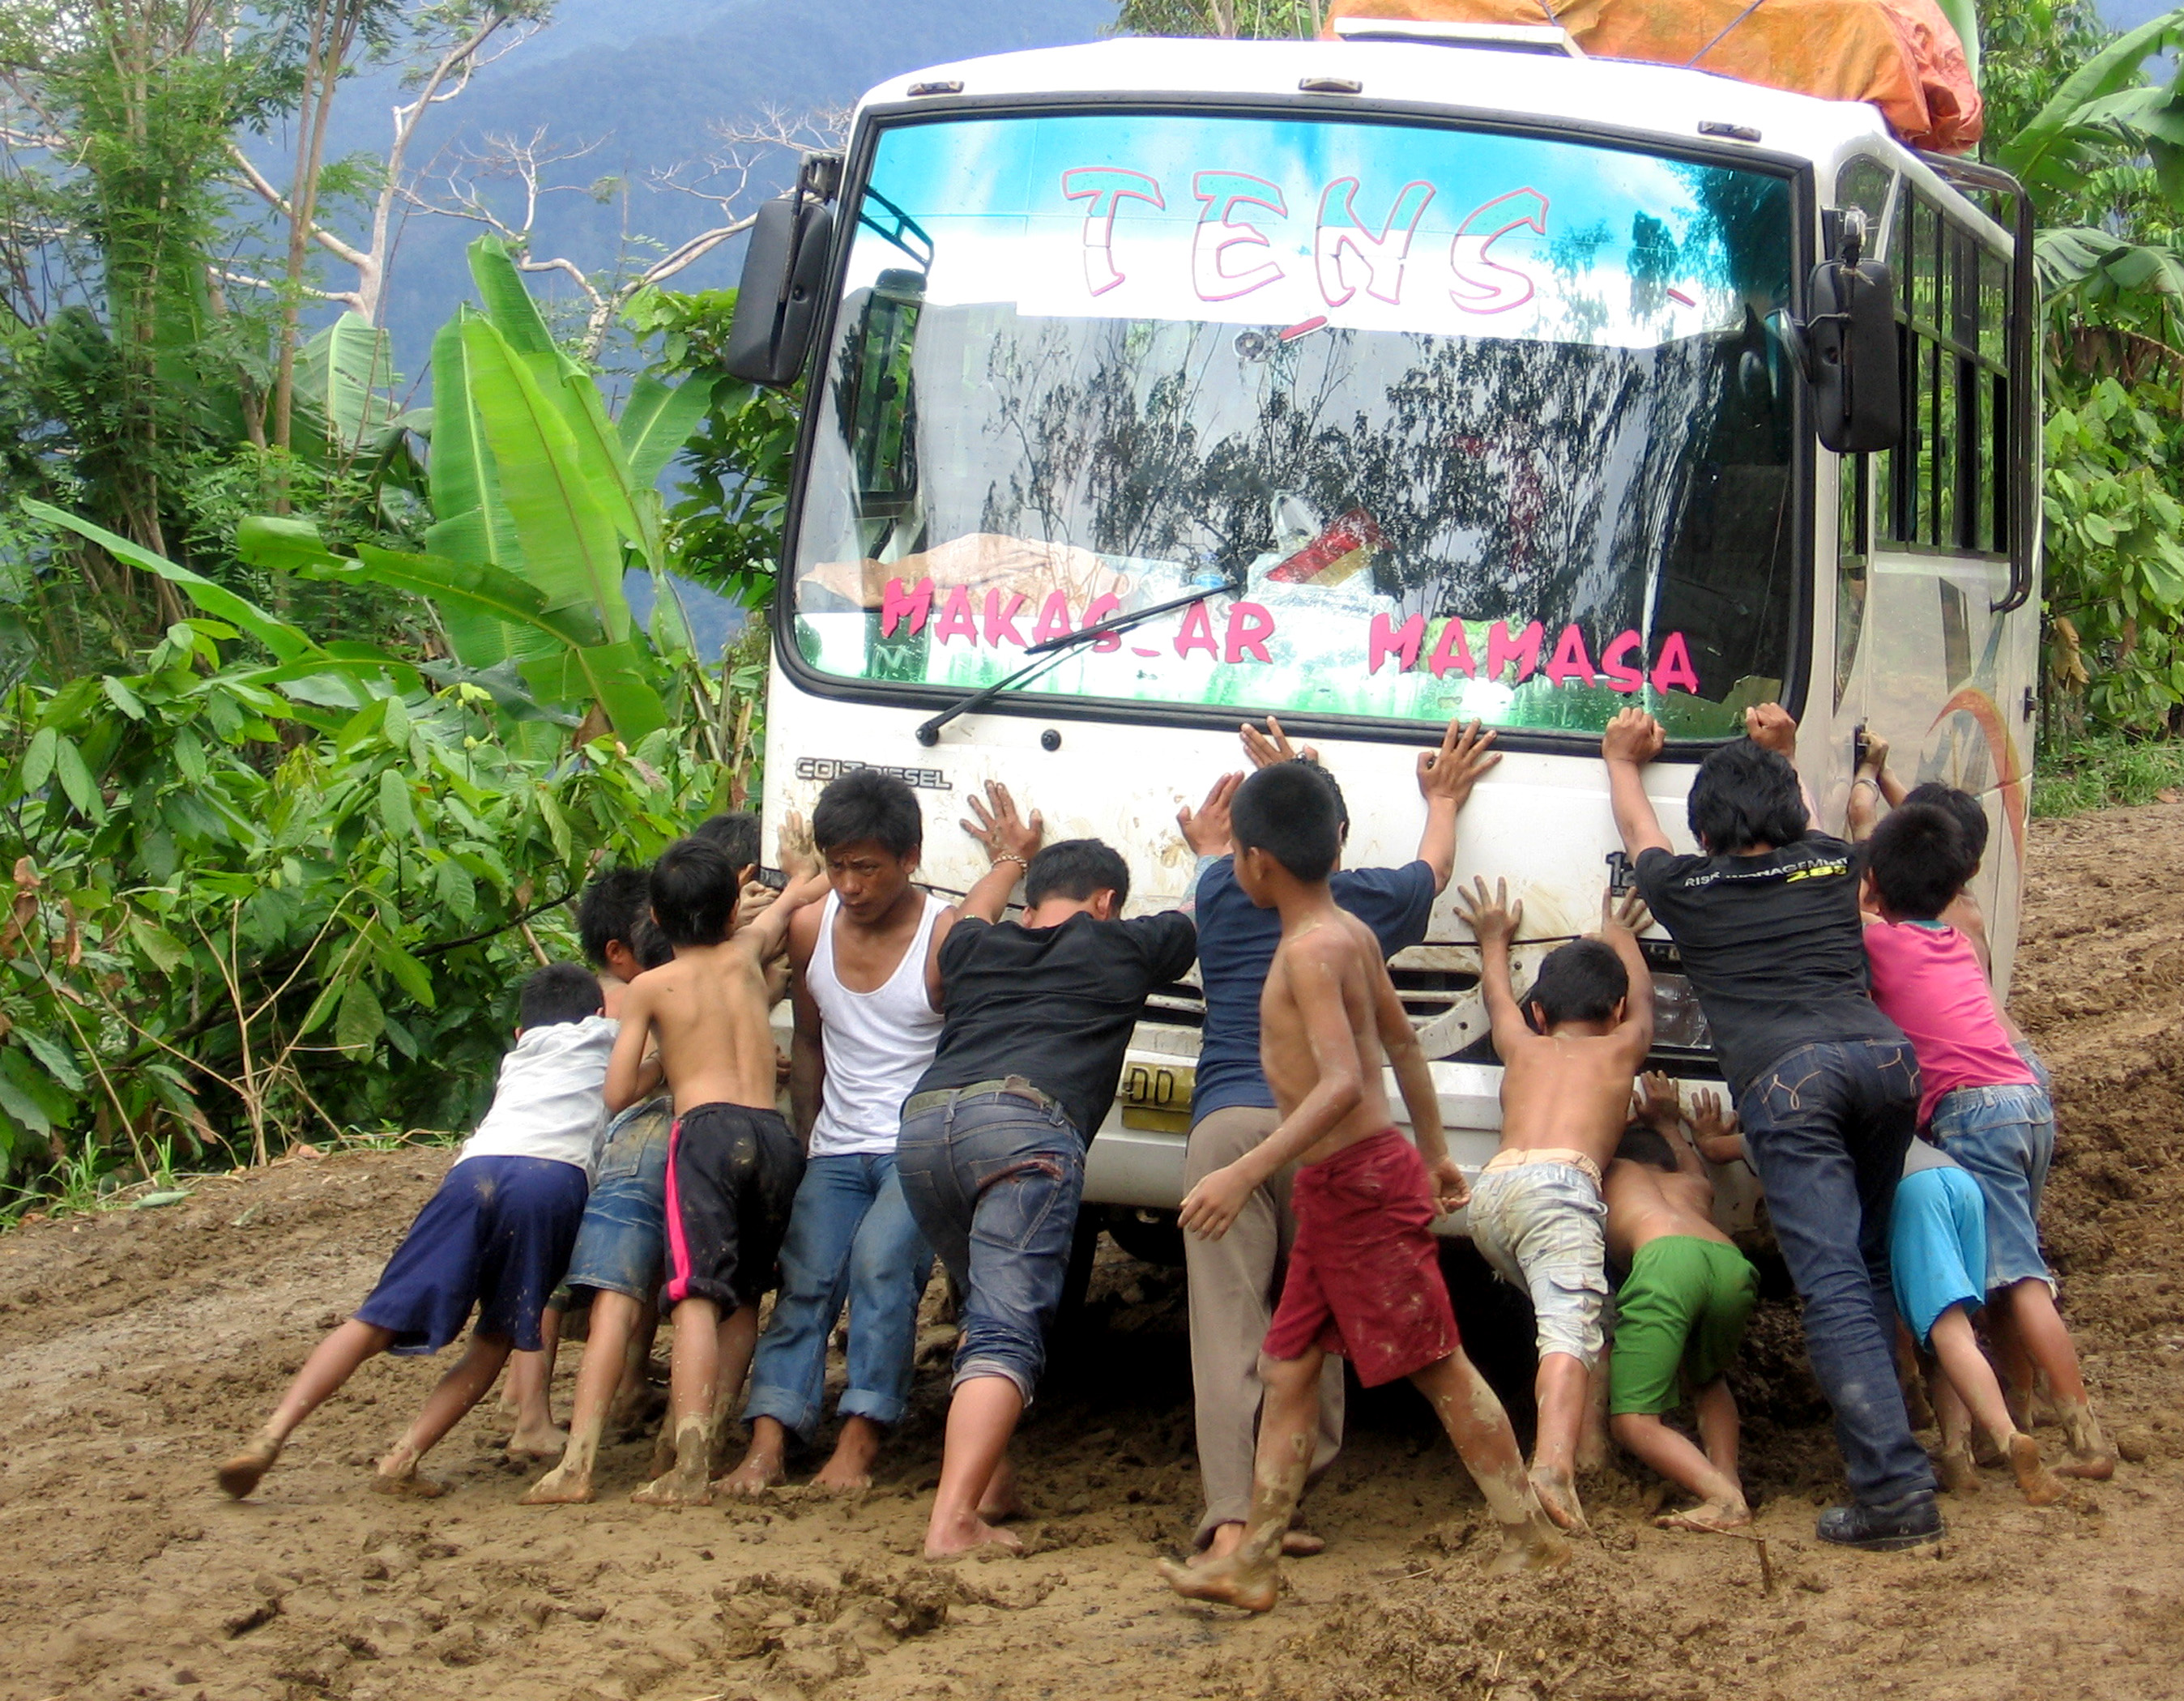 Children help push a bus that got stuck on a muddy road near one of Reach Beyond's partner radio stations in Indonesia.